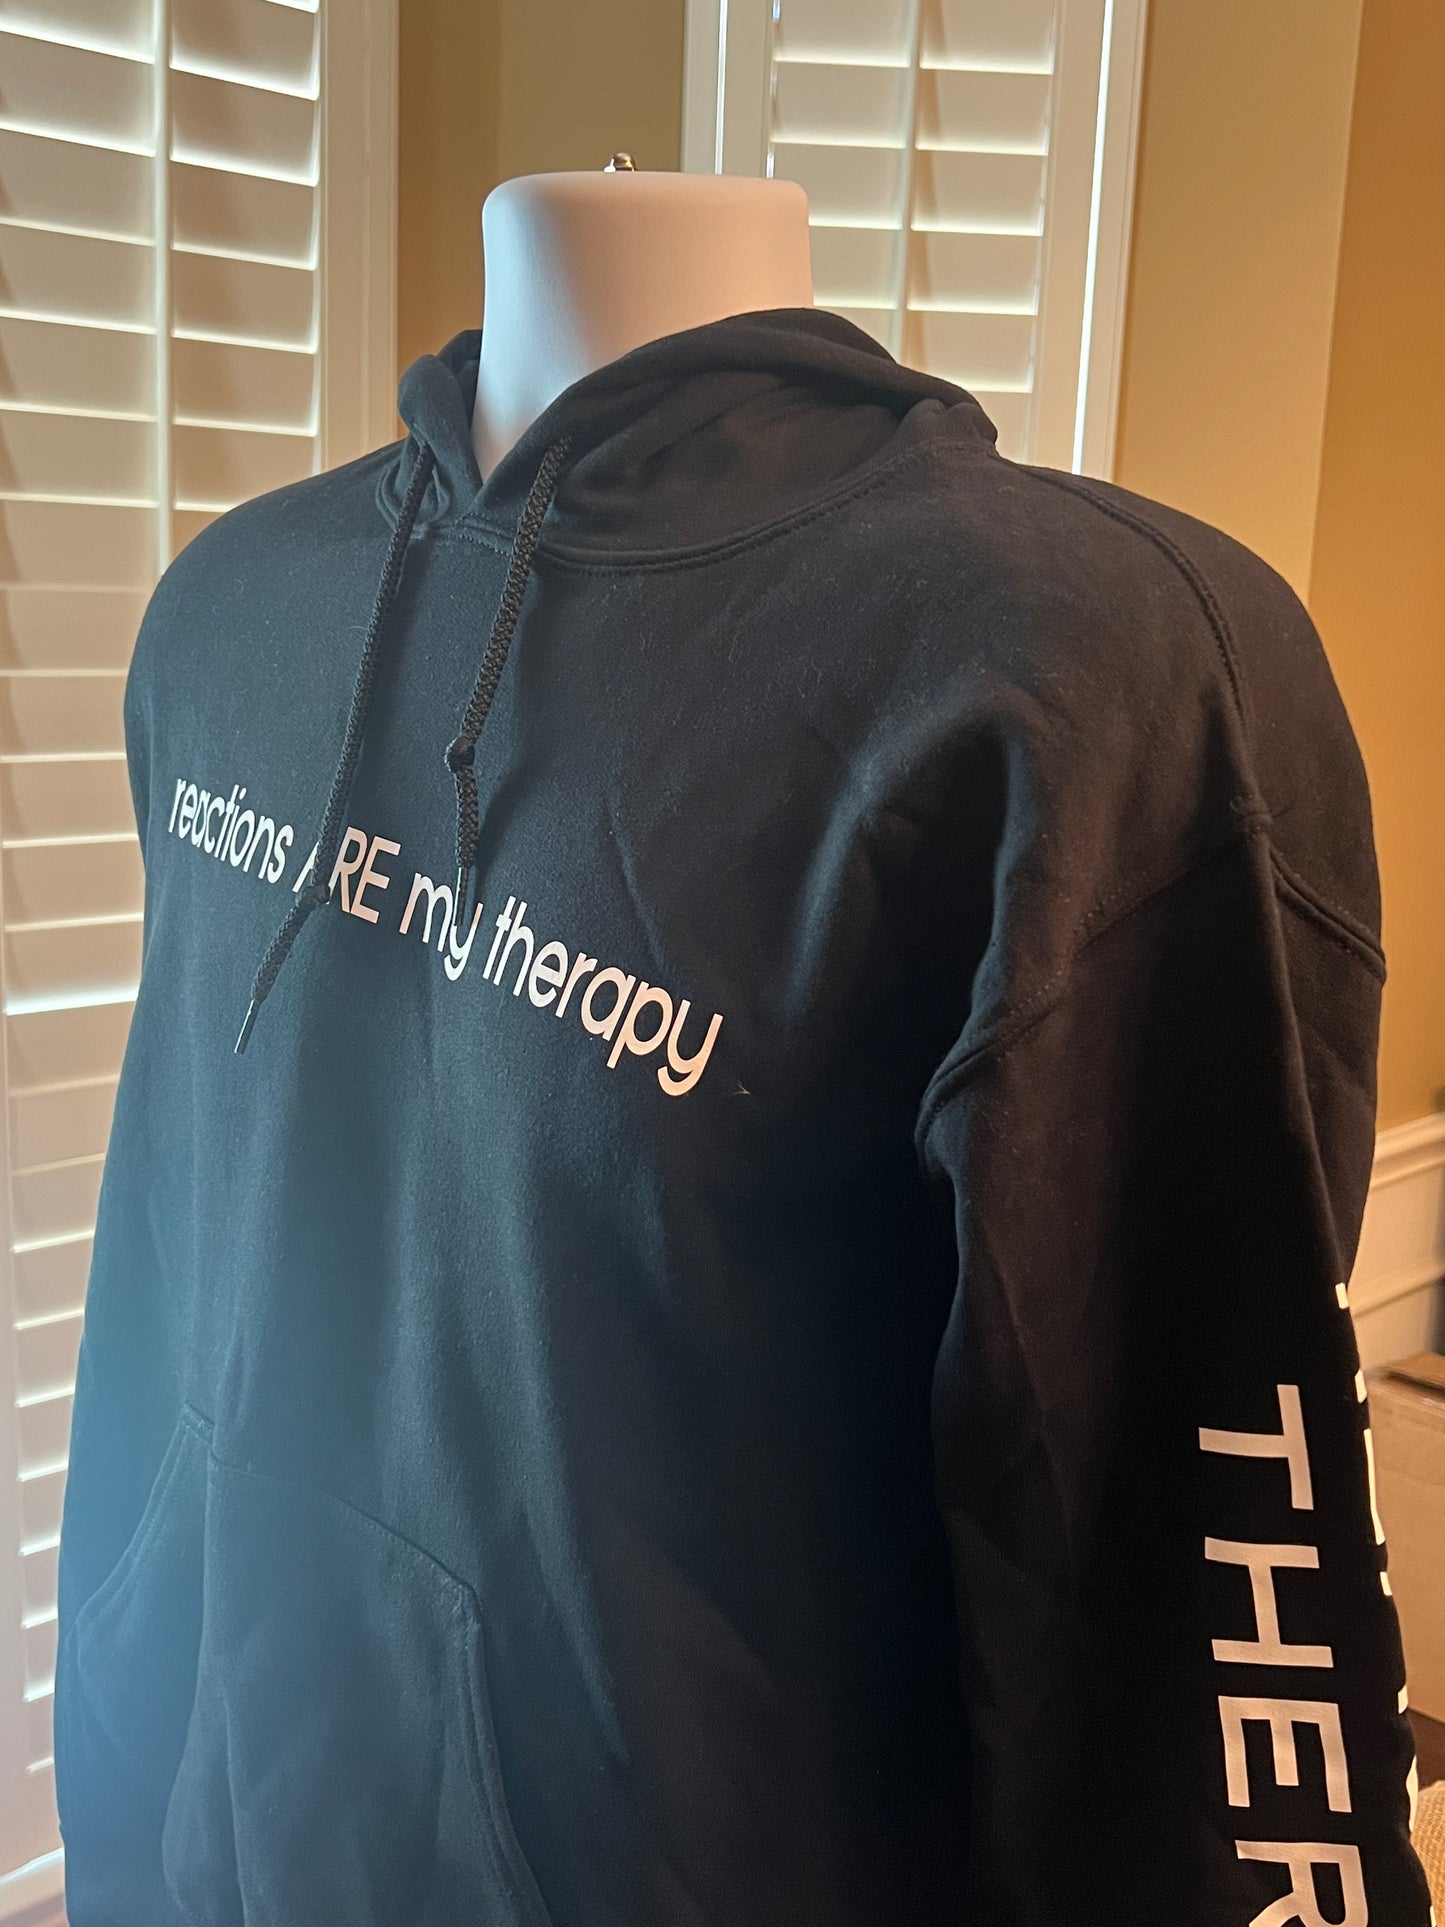 Reactions Are My Therapy Hoodie